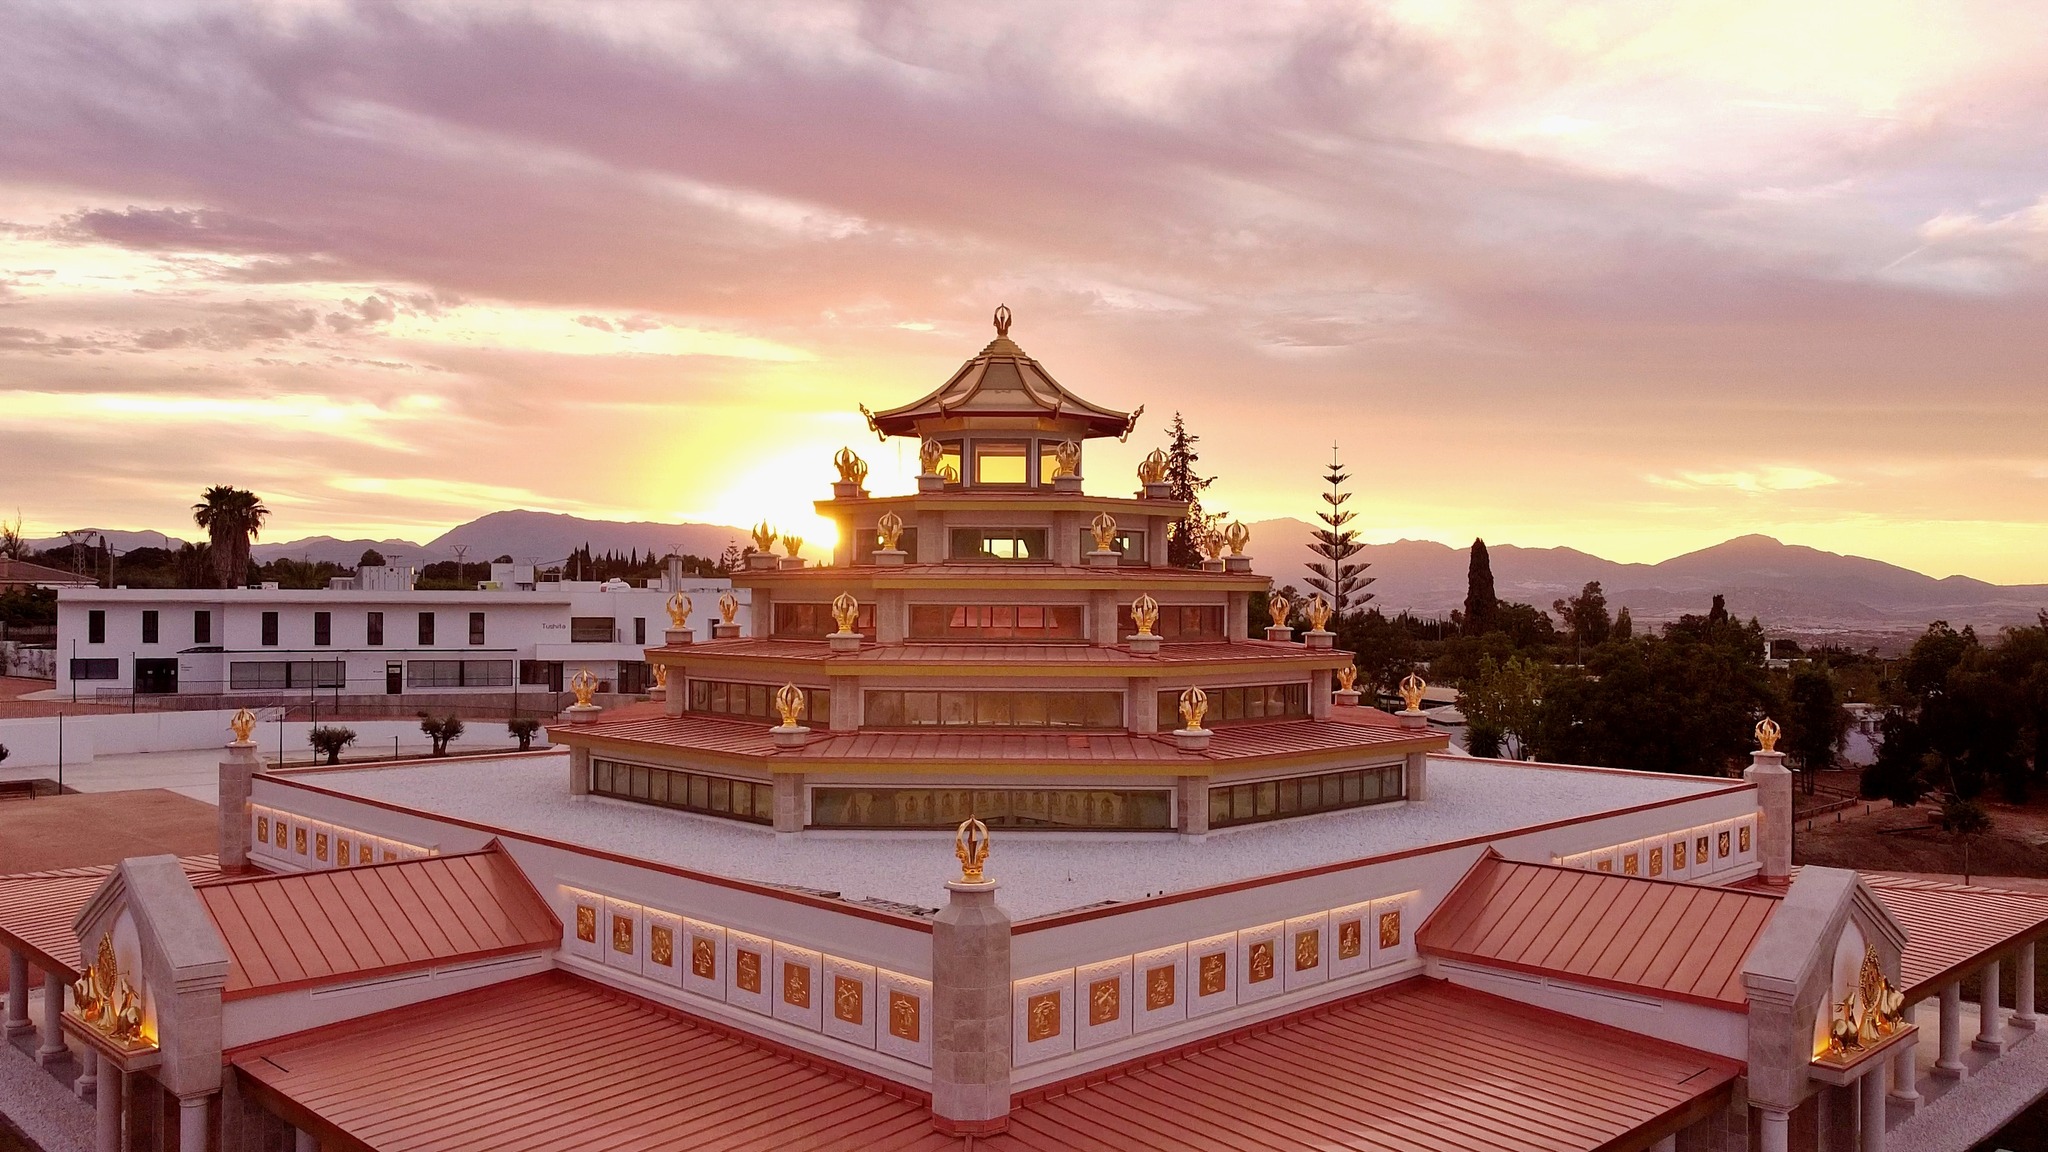 One year on for Sixth Kadampa Temple for World Peace